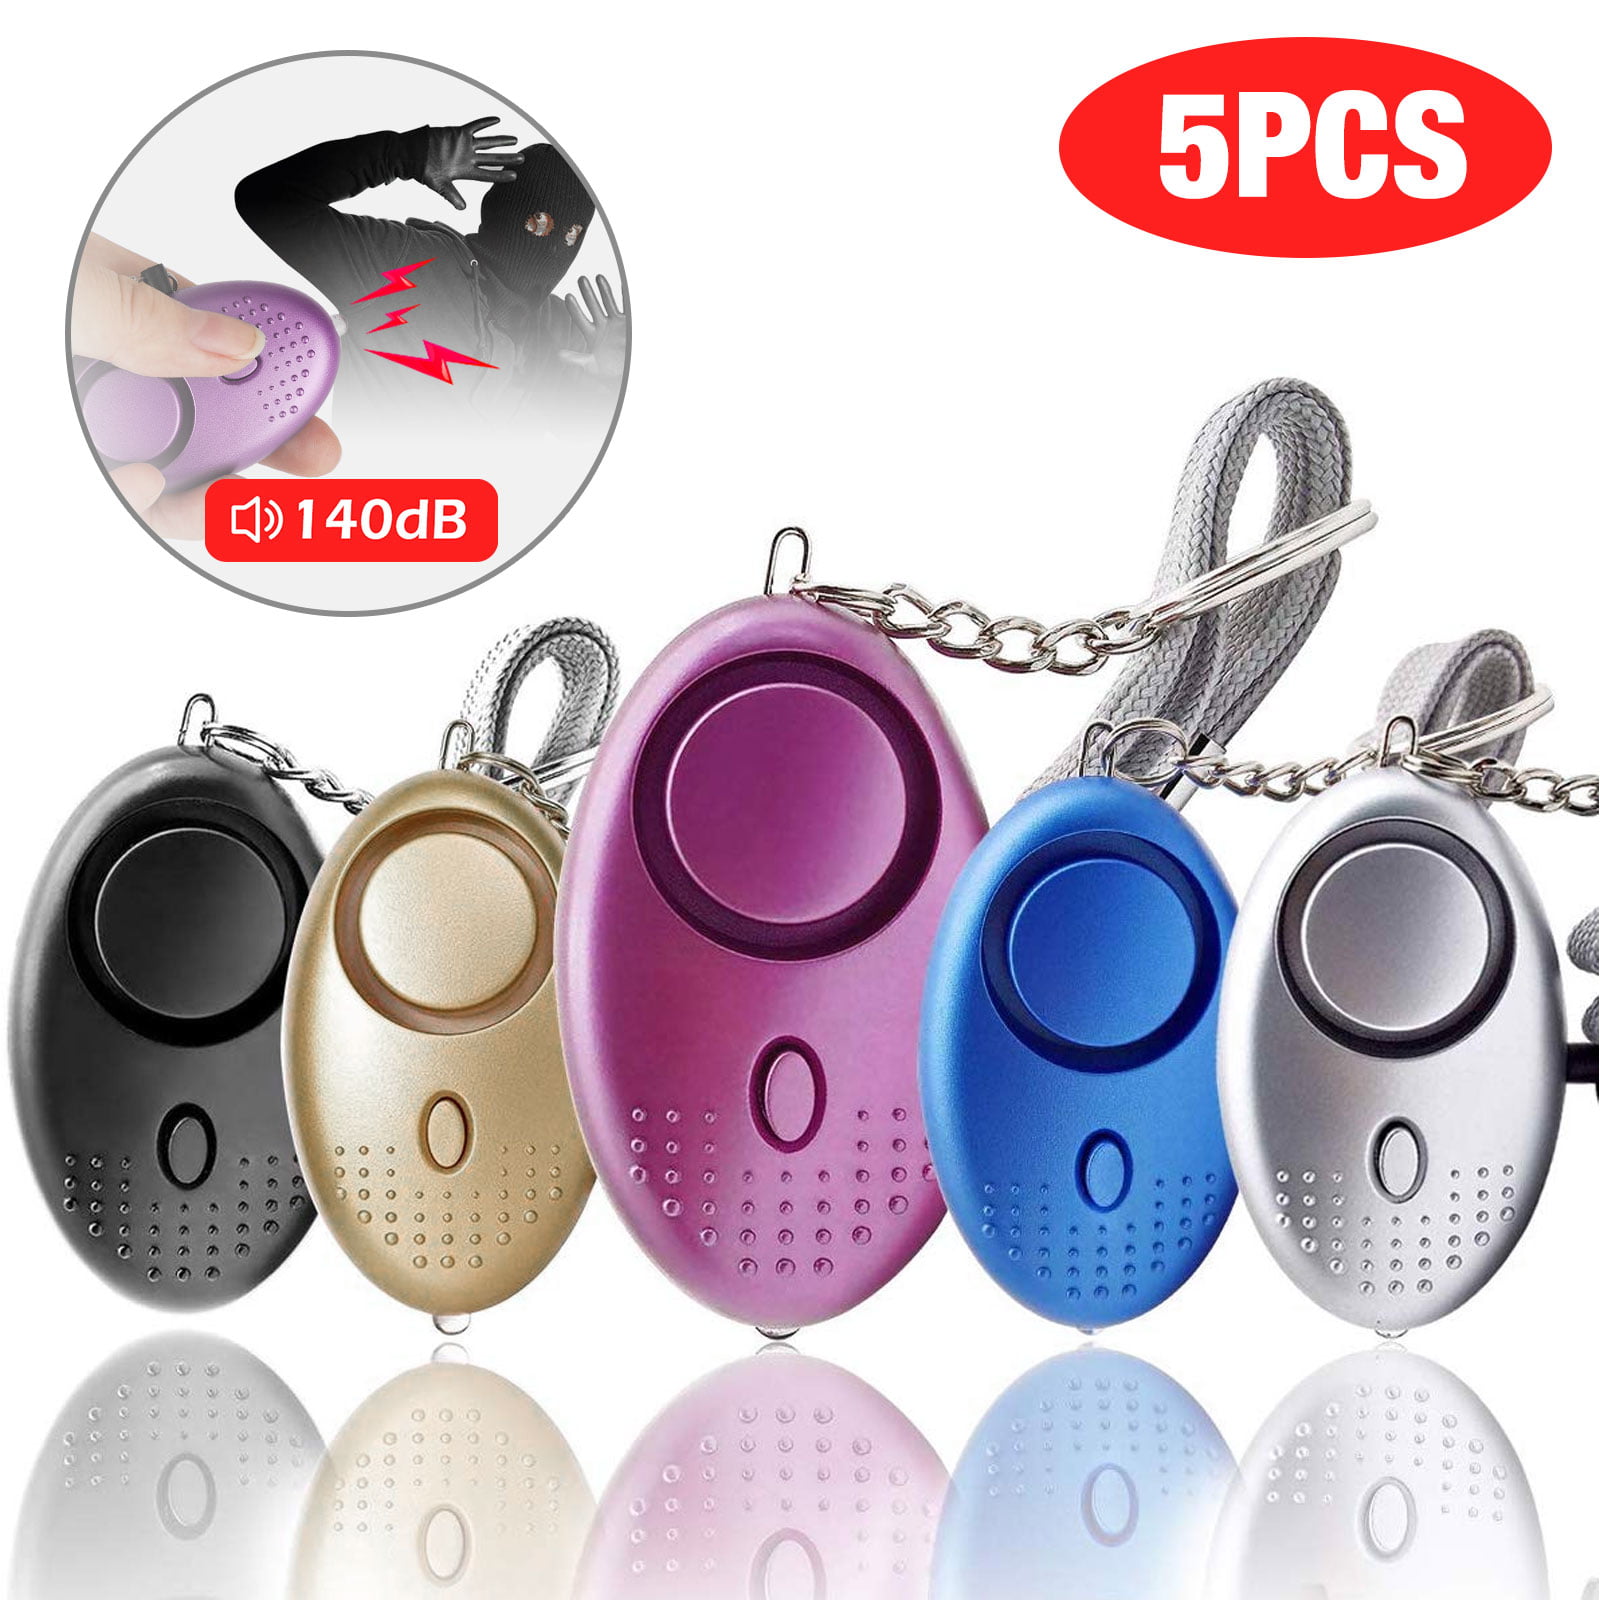 tsv-personal-alarm-5pcs-safe-sound-personal-alarm-keychain-with-led